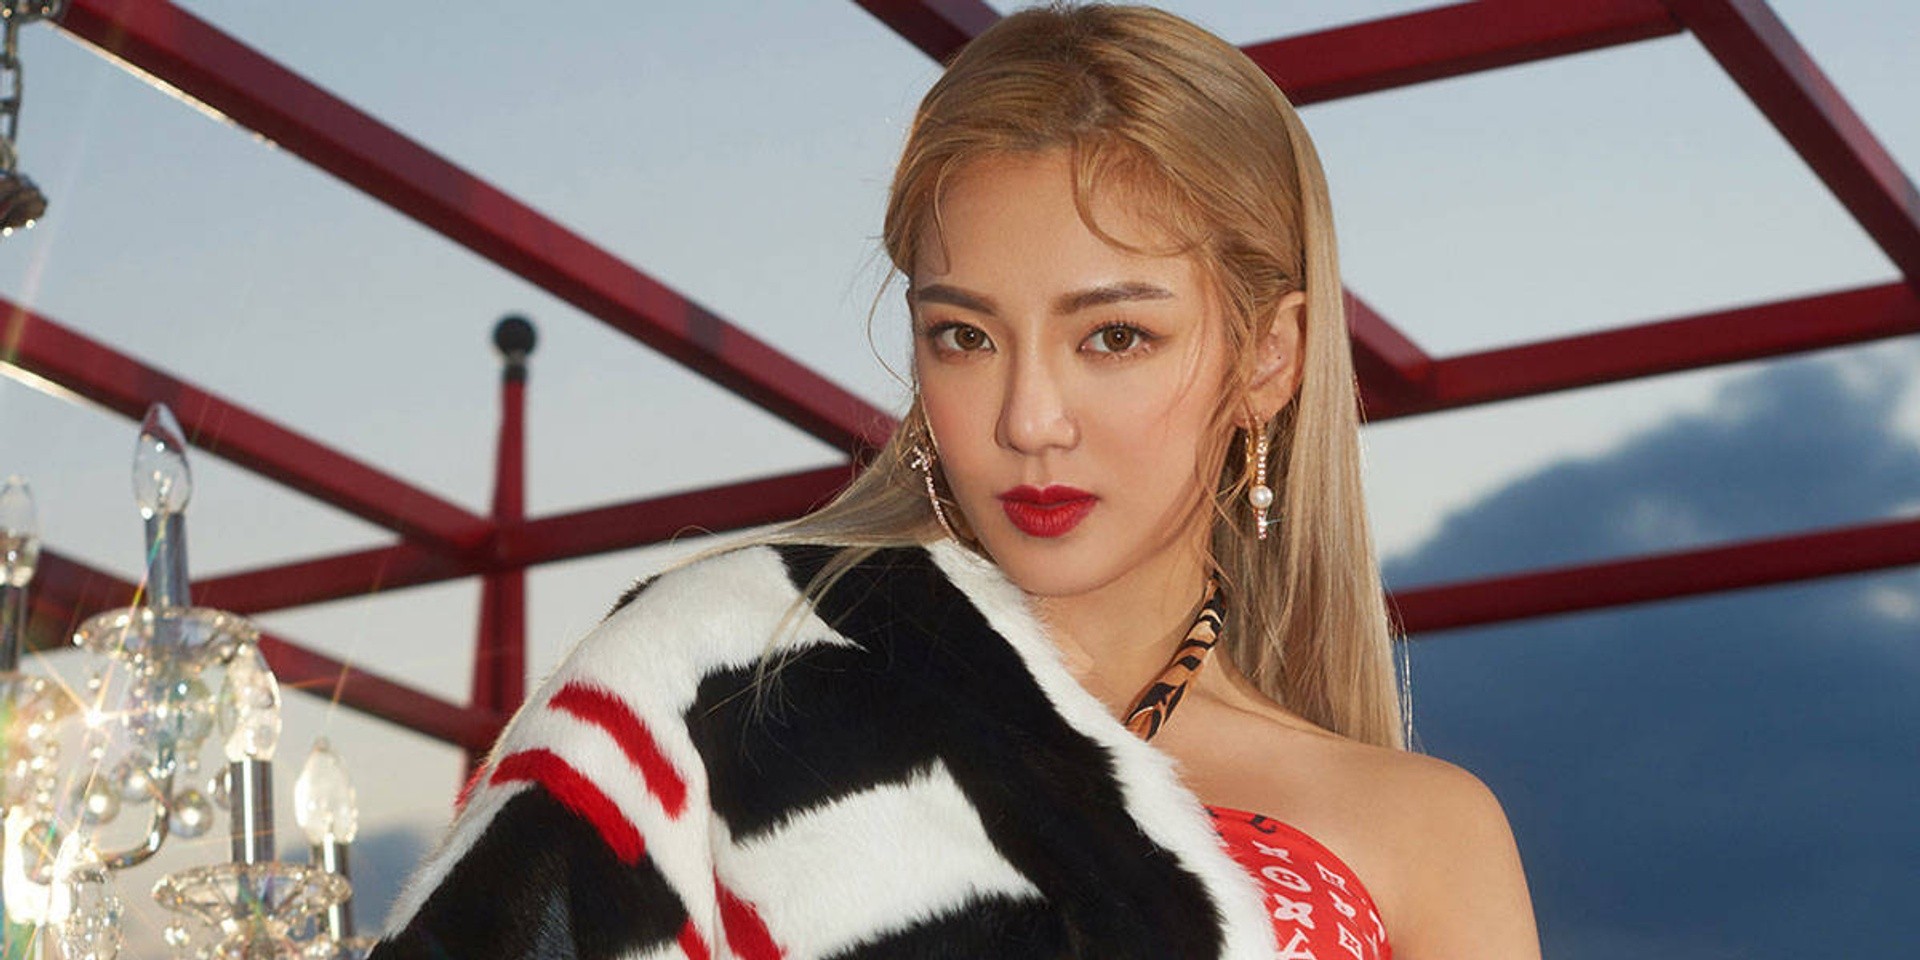 SNSD's Hyo joins Legacy Festival's line-up